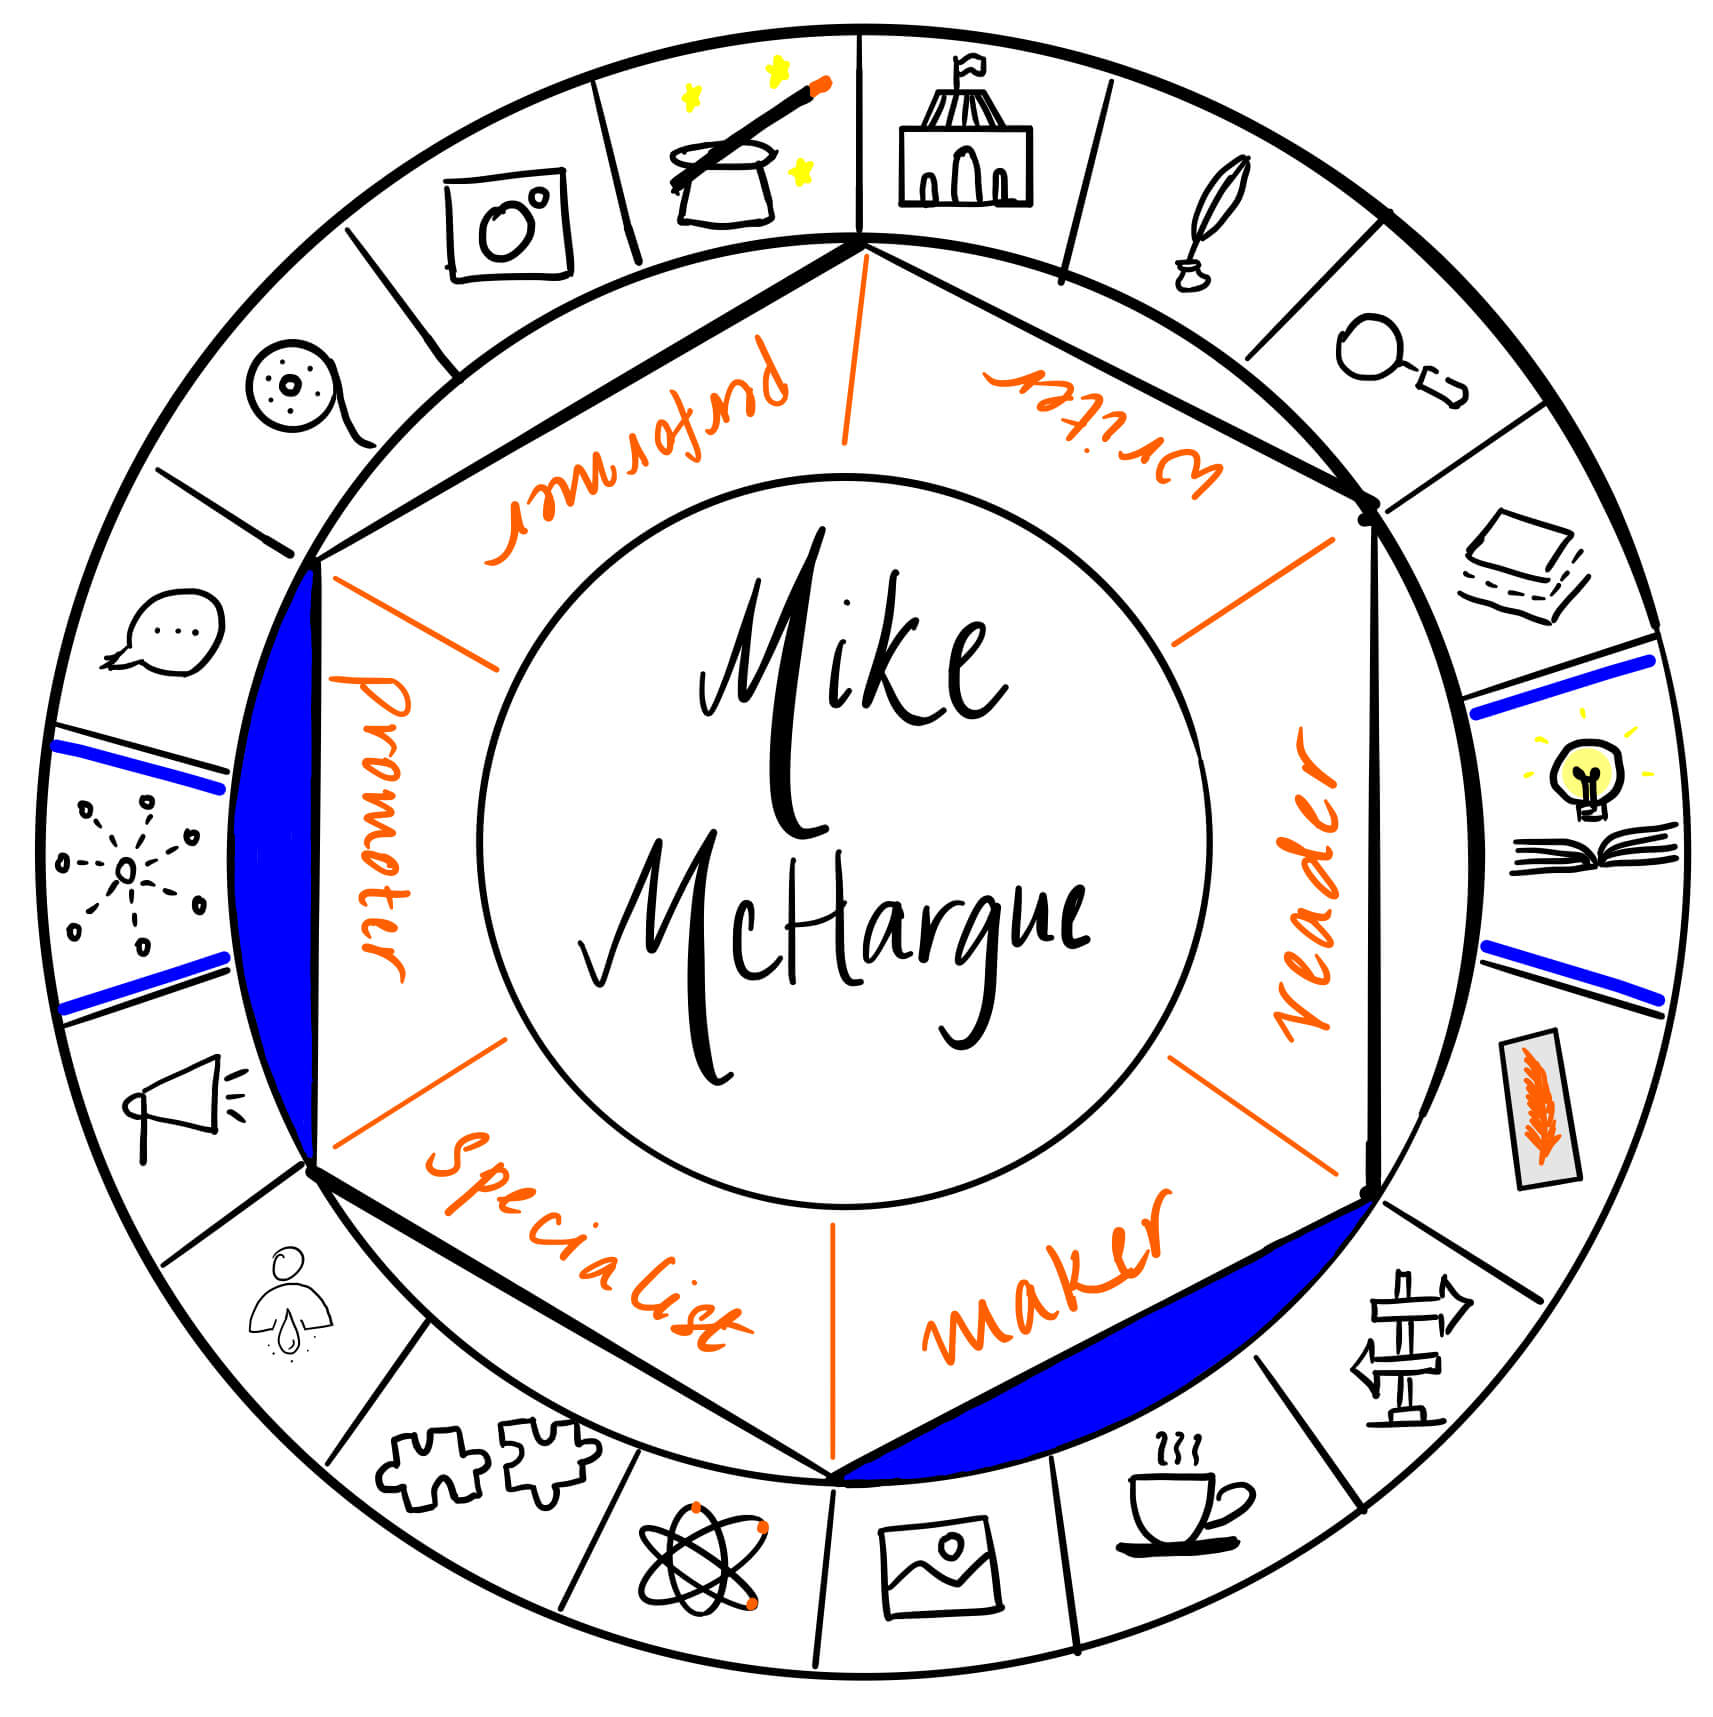 Mike McHargue is a maker and promoter. It's a pleasure to have him over on The Creator's Roulette to talk about leadership.